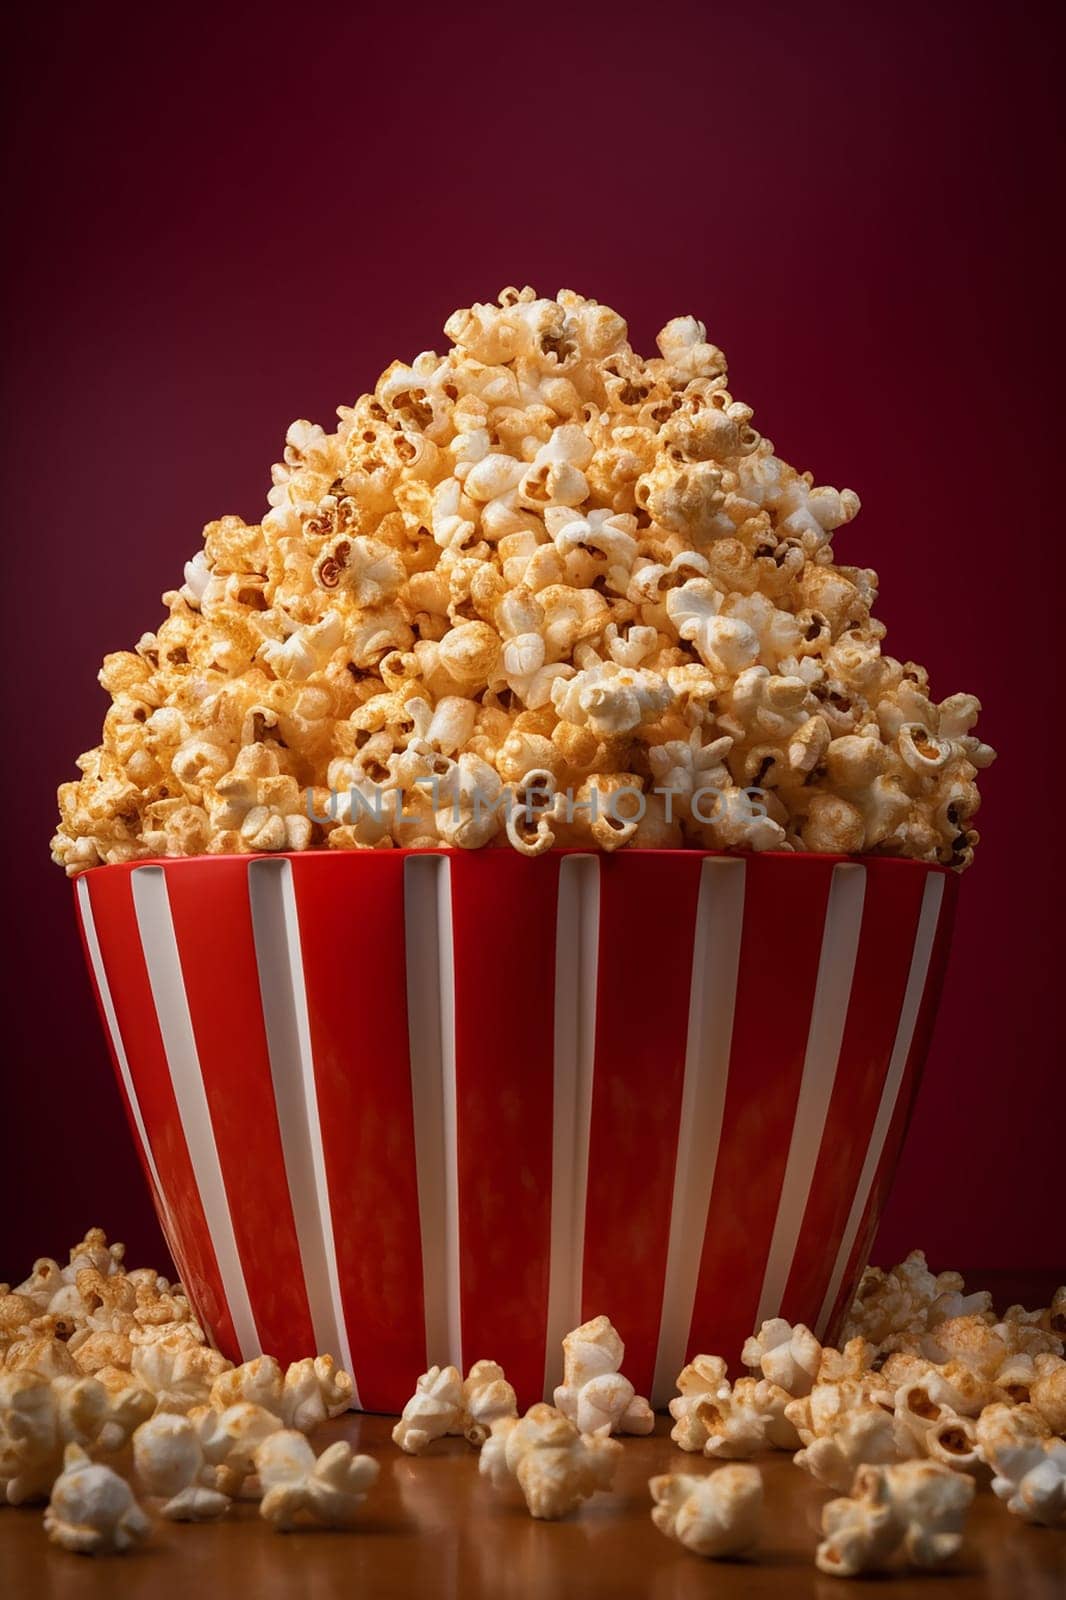 Overflowing popcorn perfect snack for cinema or theater in a striped red and white container by Hype2art